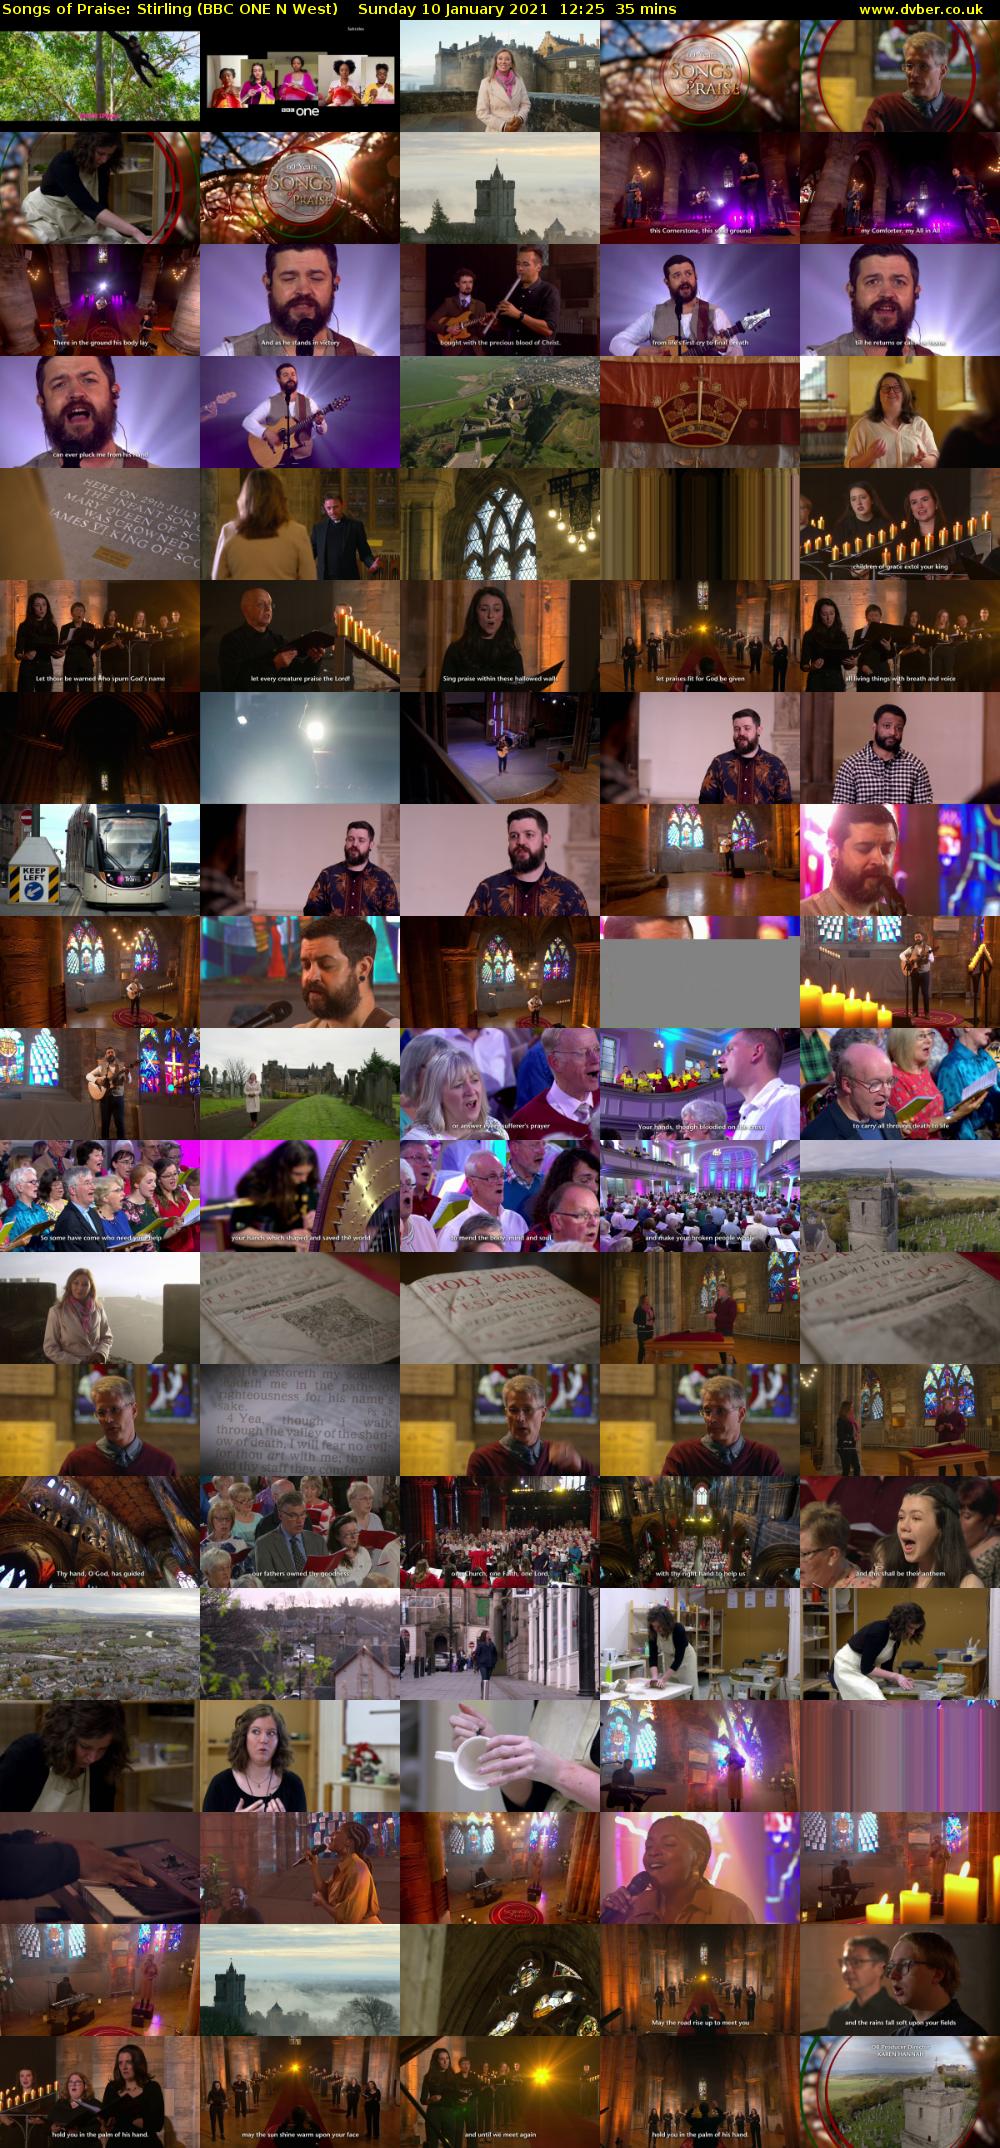 Songs of Praise: Stirling (BBC ONE N West) Sunday 10 January 2021 12:25 - 13:00